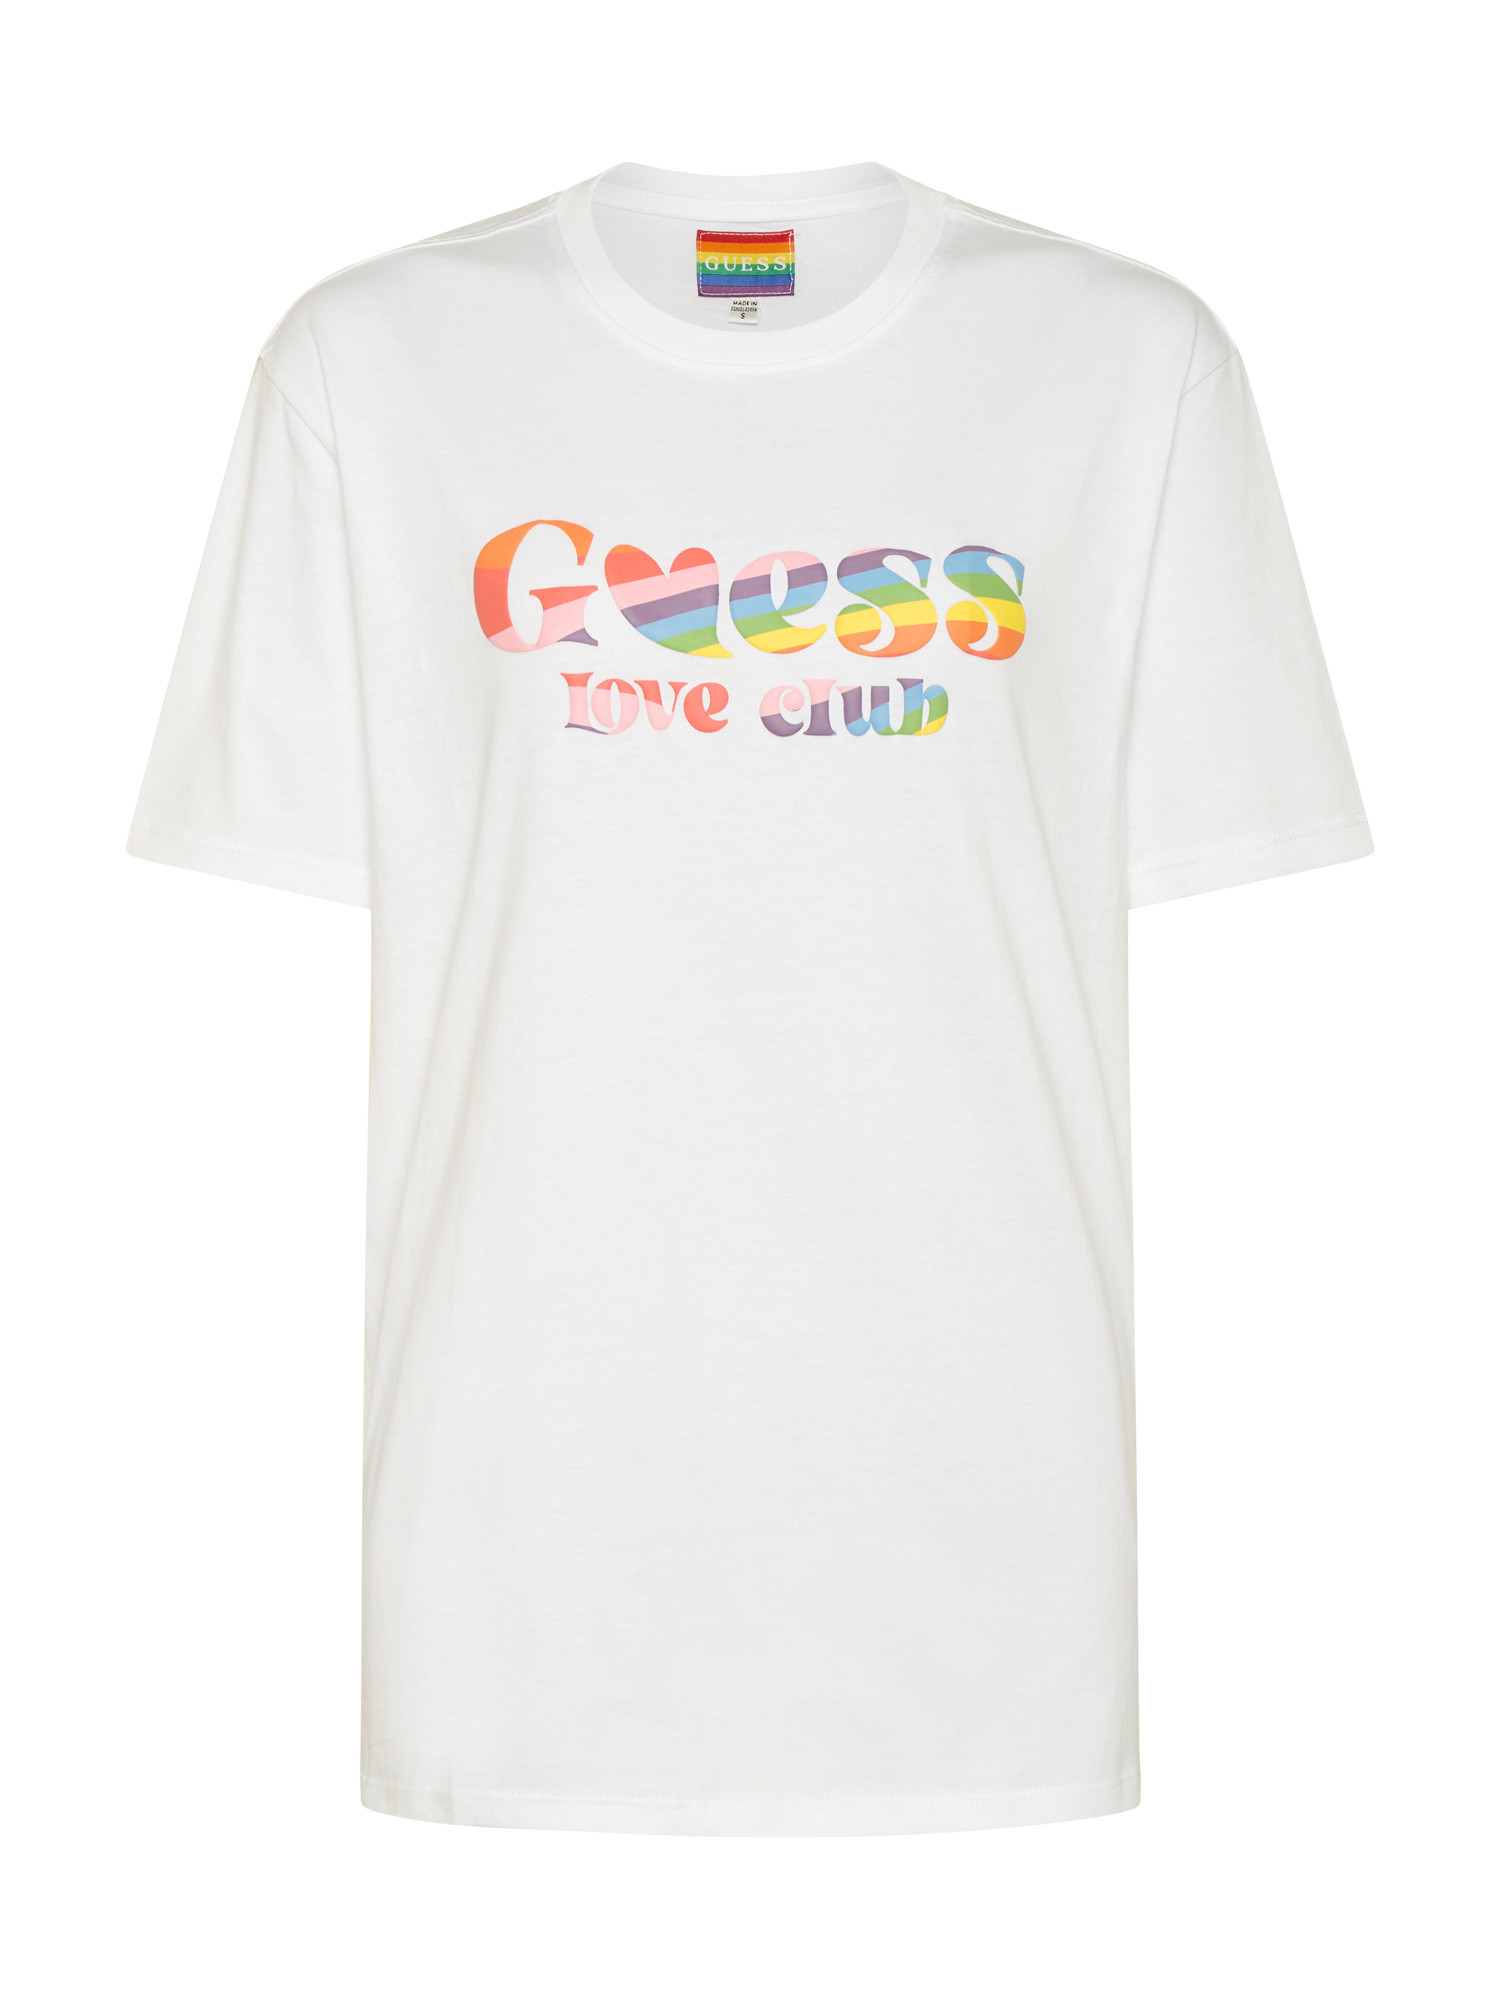 Guess - T-shirt con logo, Bianco, large image number 0